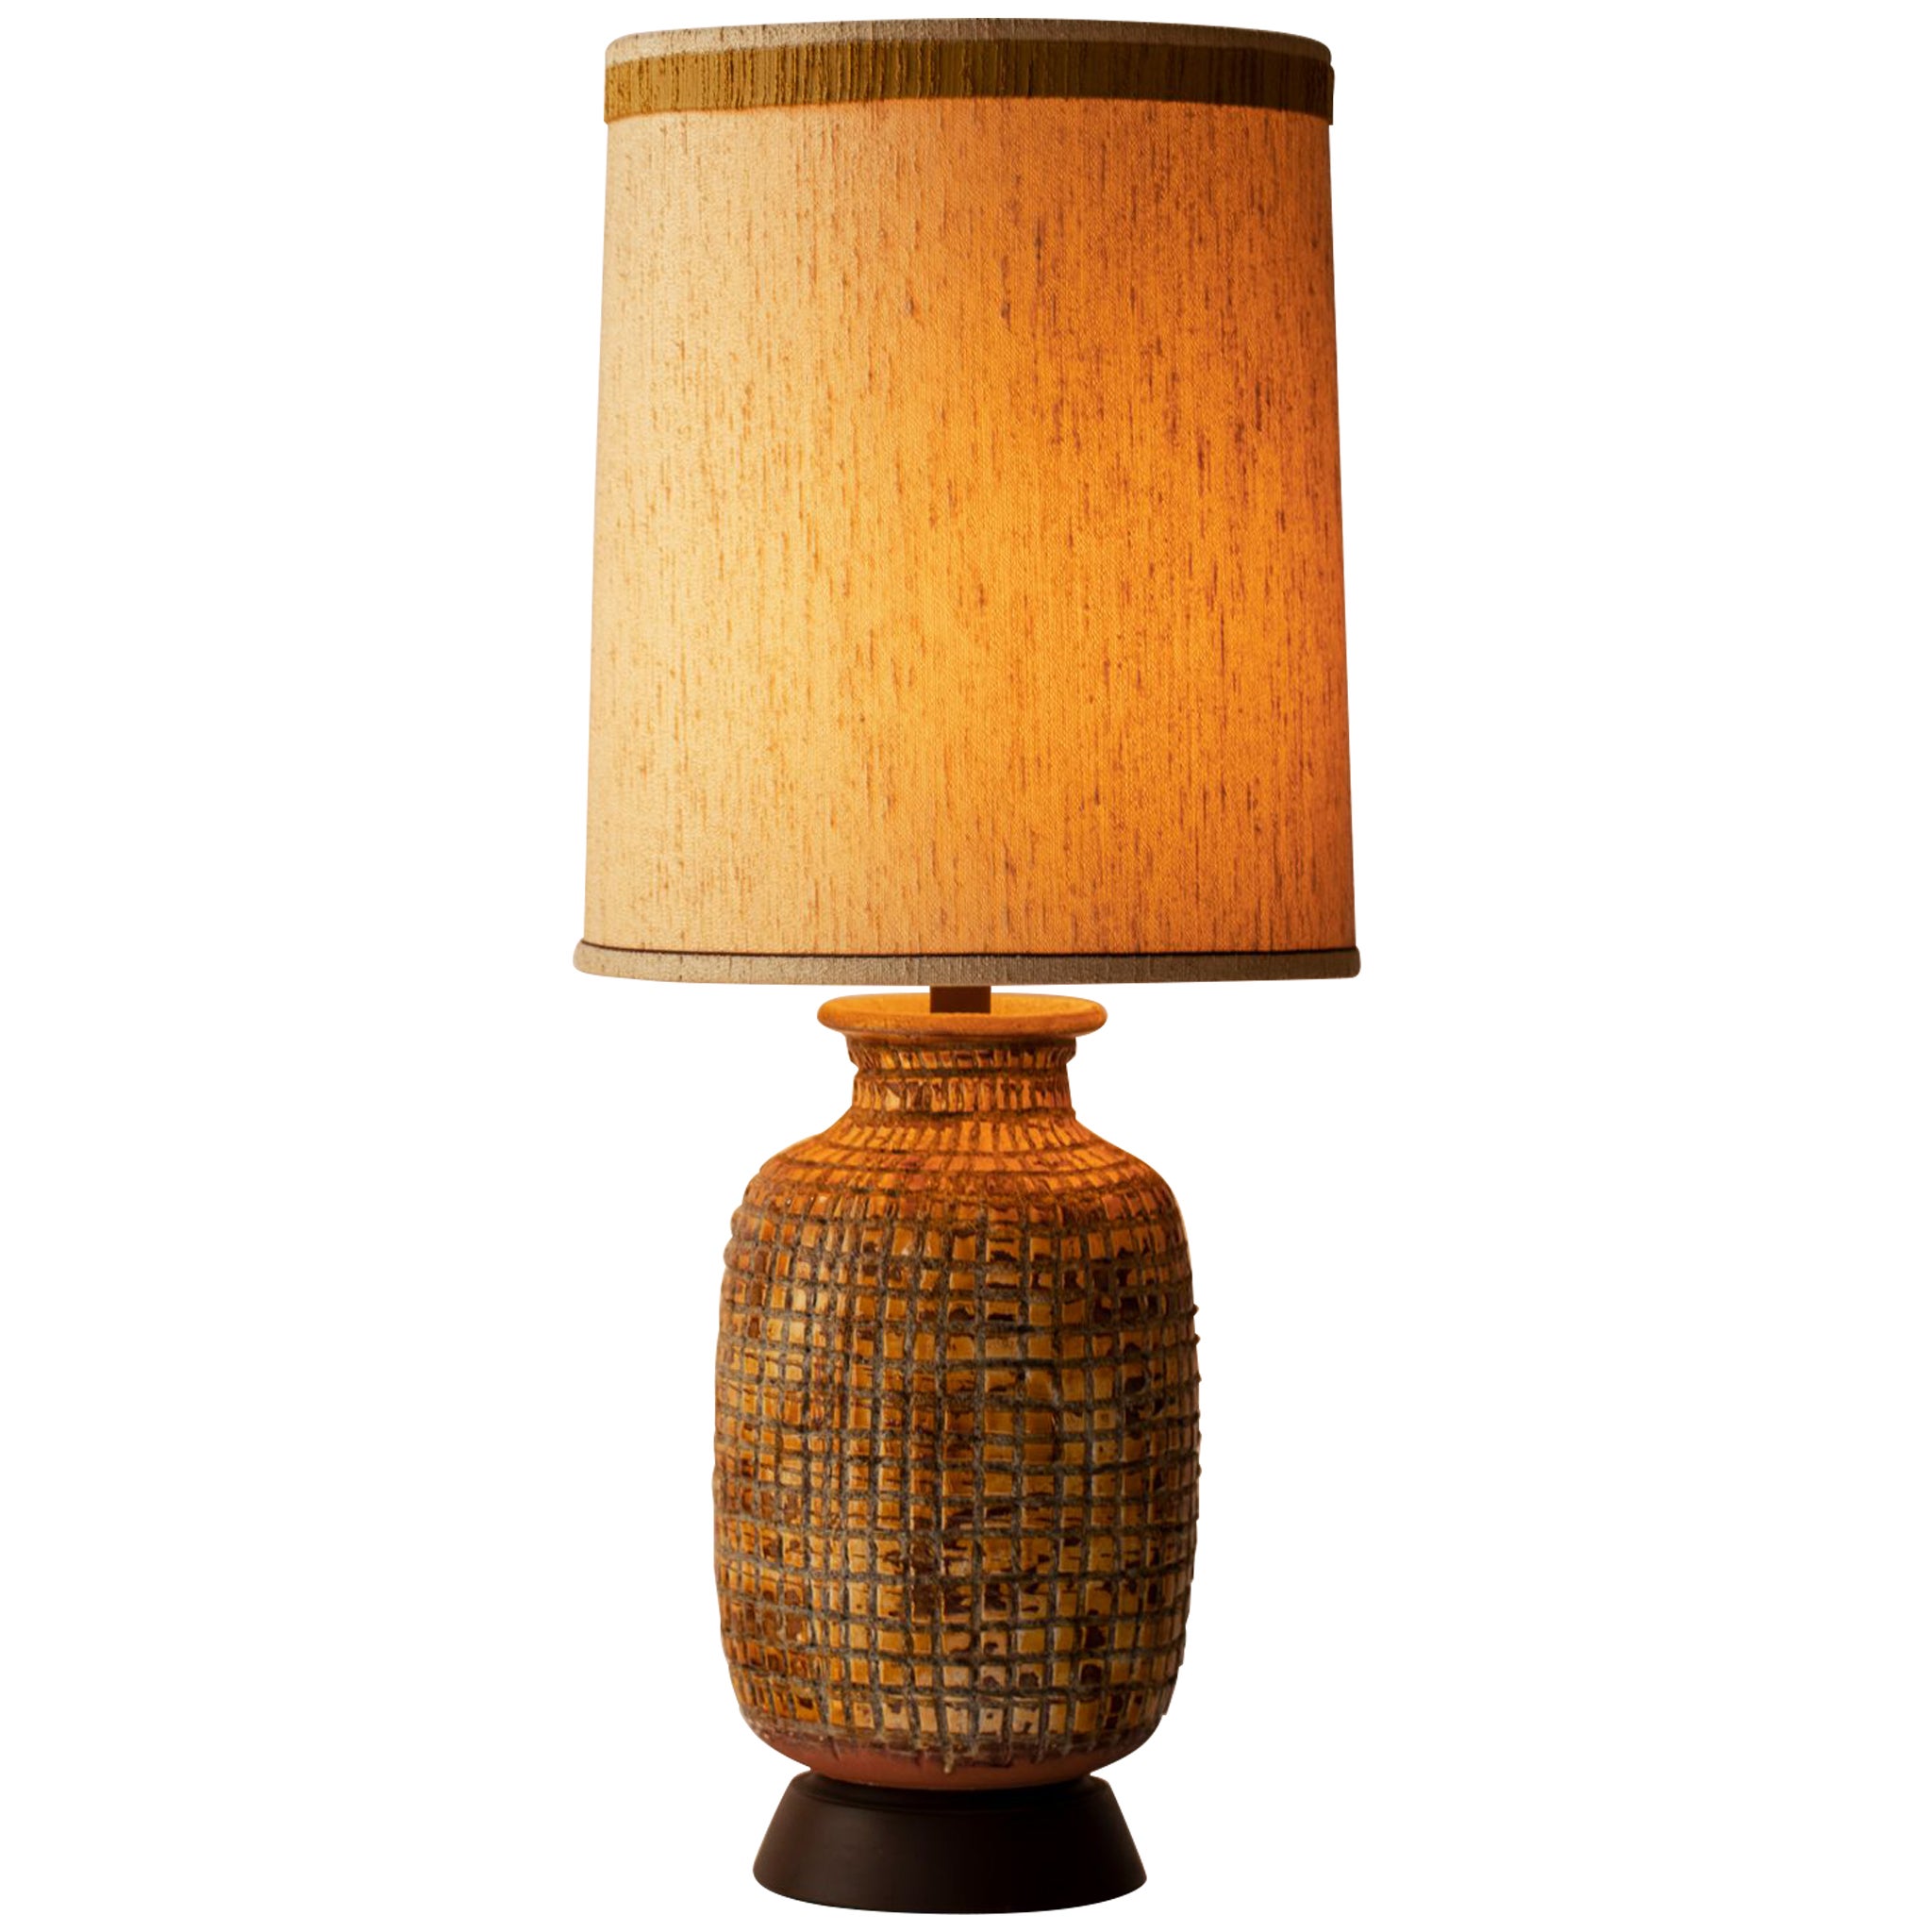 Large Brutalist Glazed Terracotta Lamp with Original Textured Shade